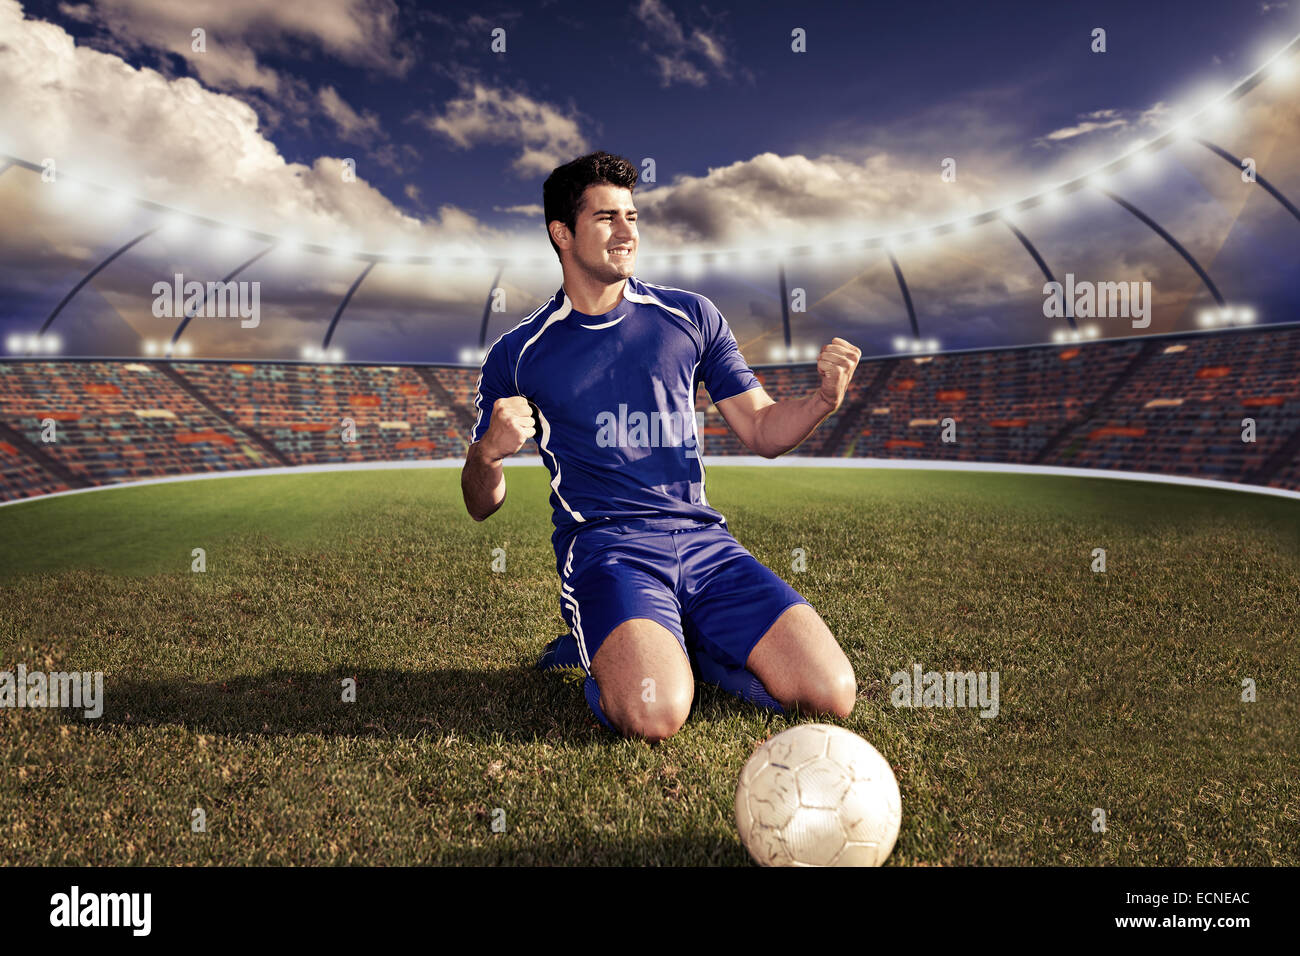 soccer or football  player on the field Stock Photo